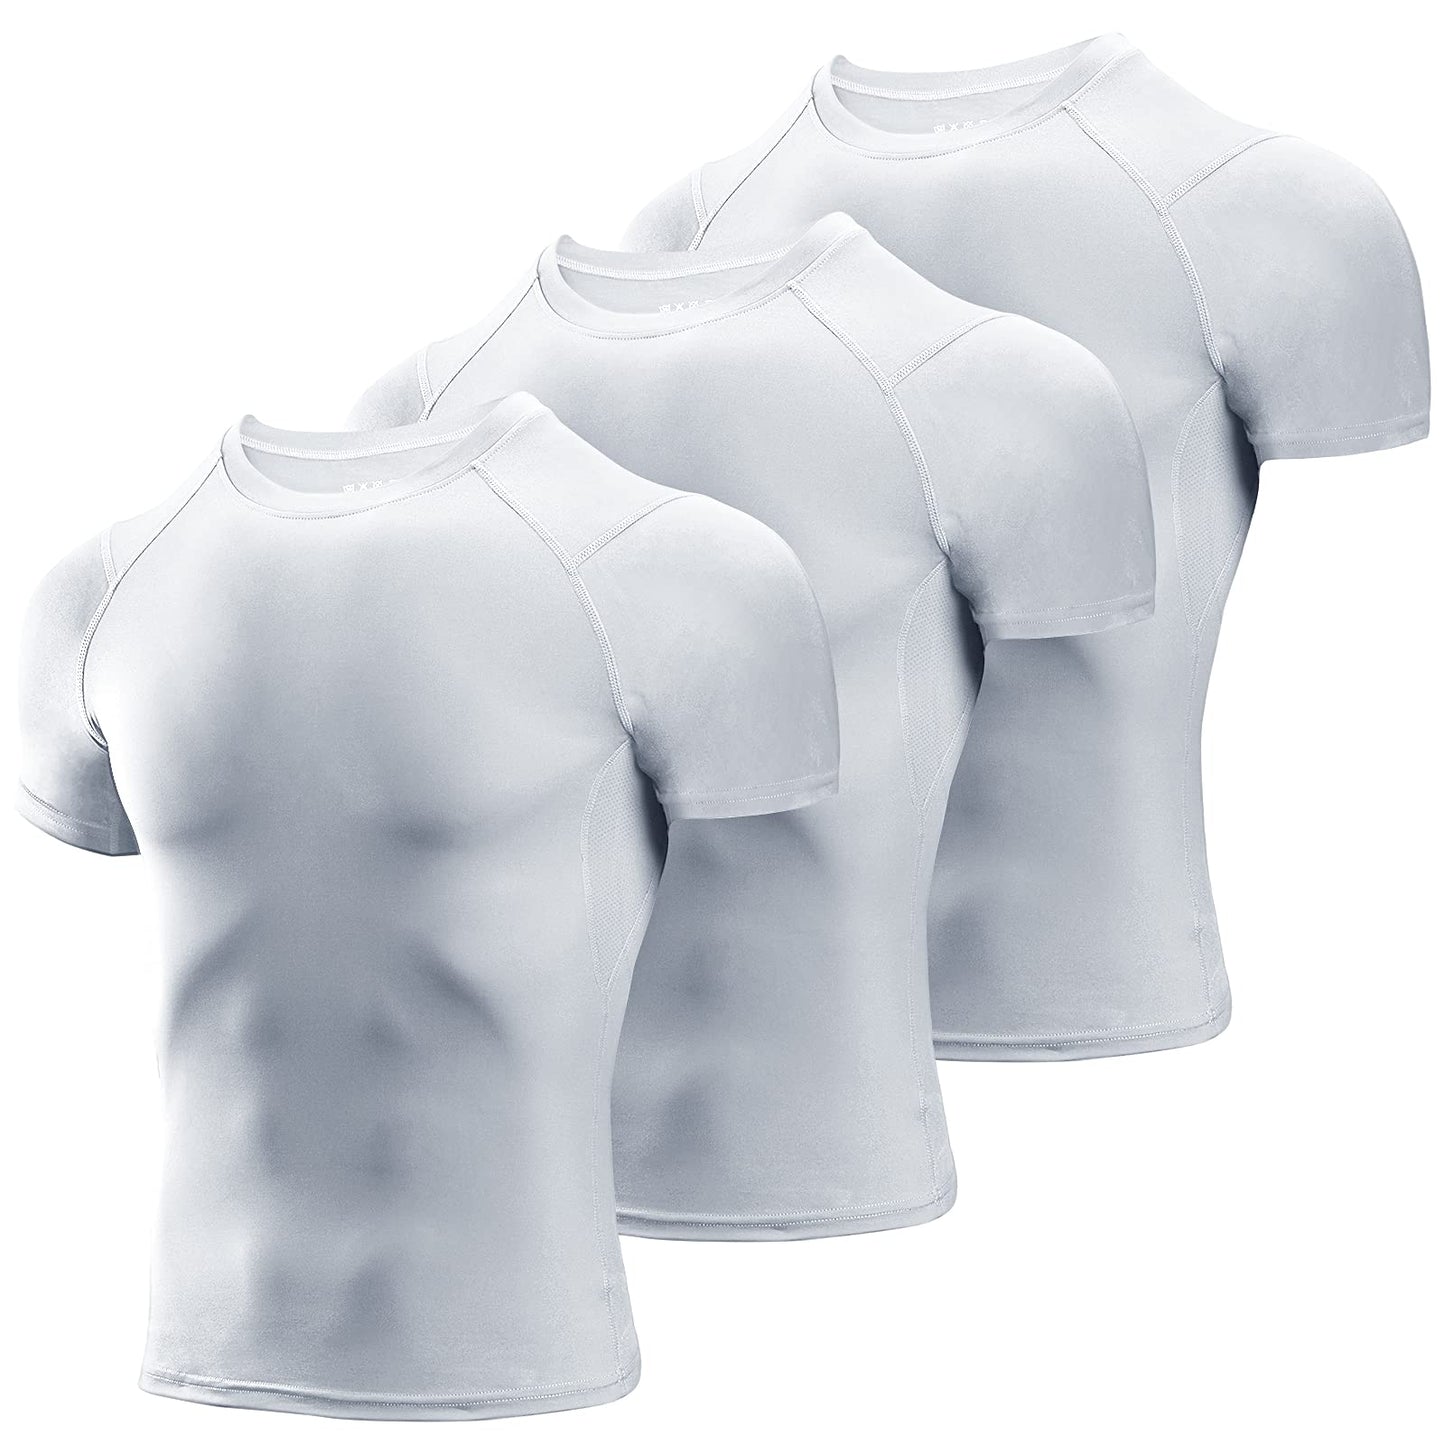 Niksa Cool Dry Compression Workout 3 Pack Shirts